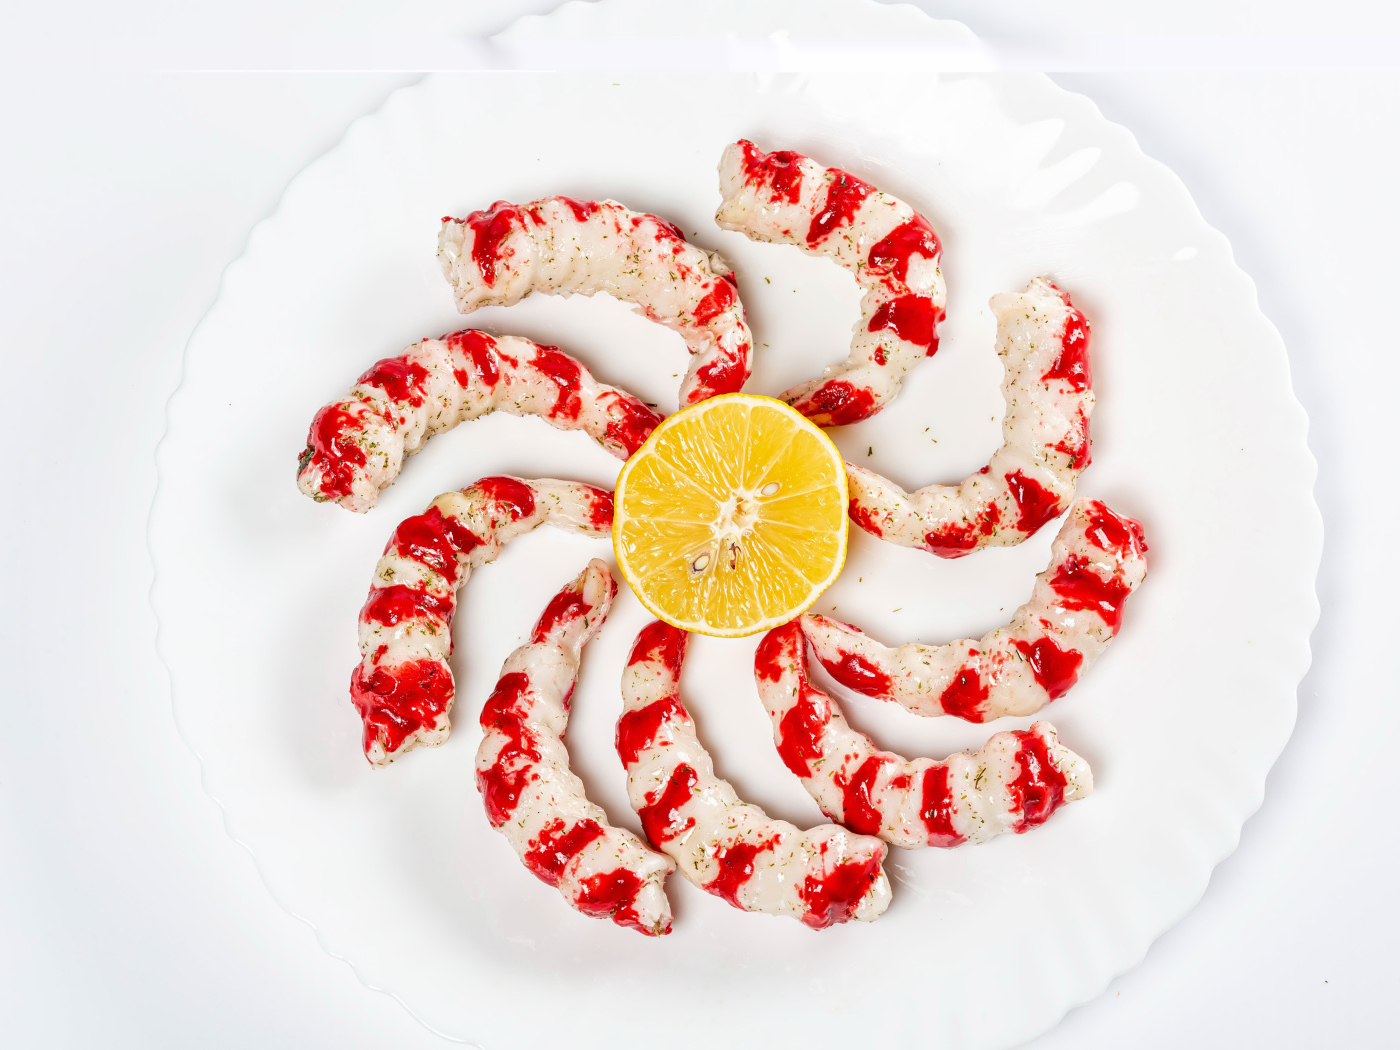 Tiger prawns on a plate with lemon on a white background